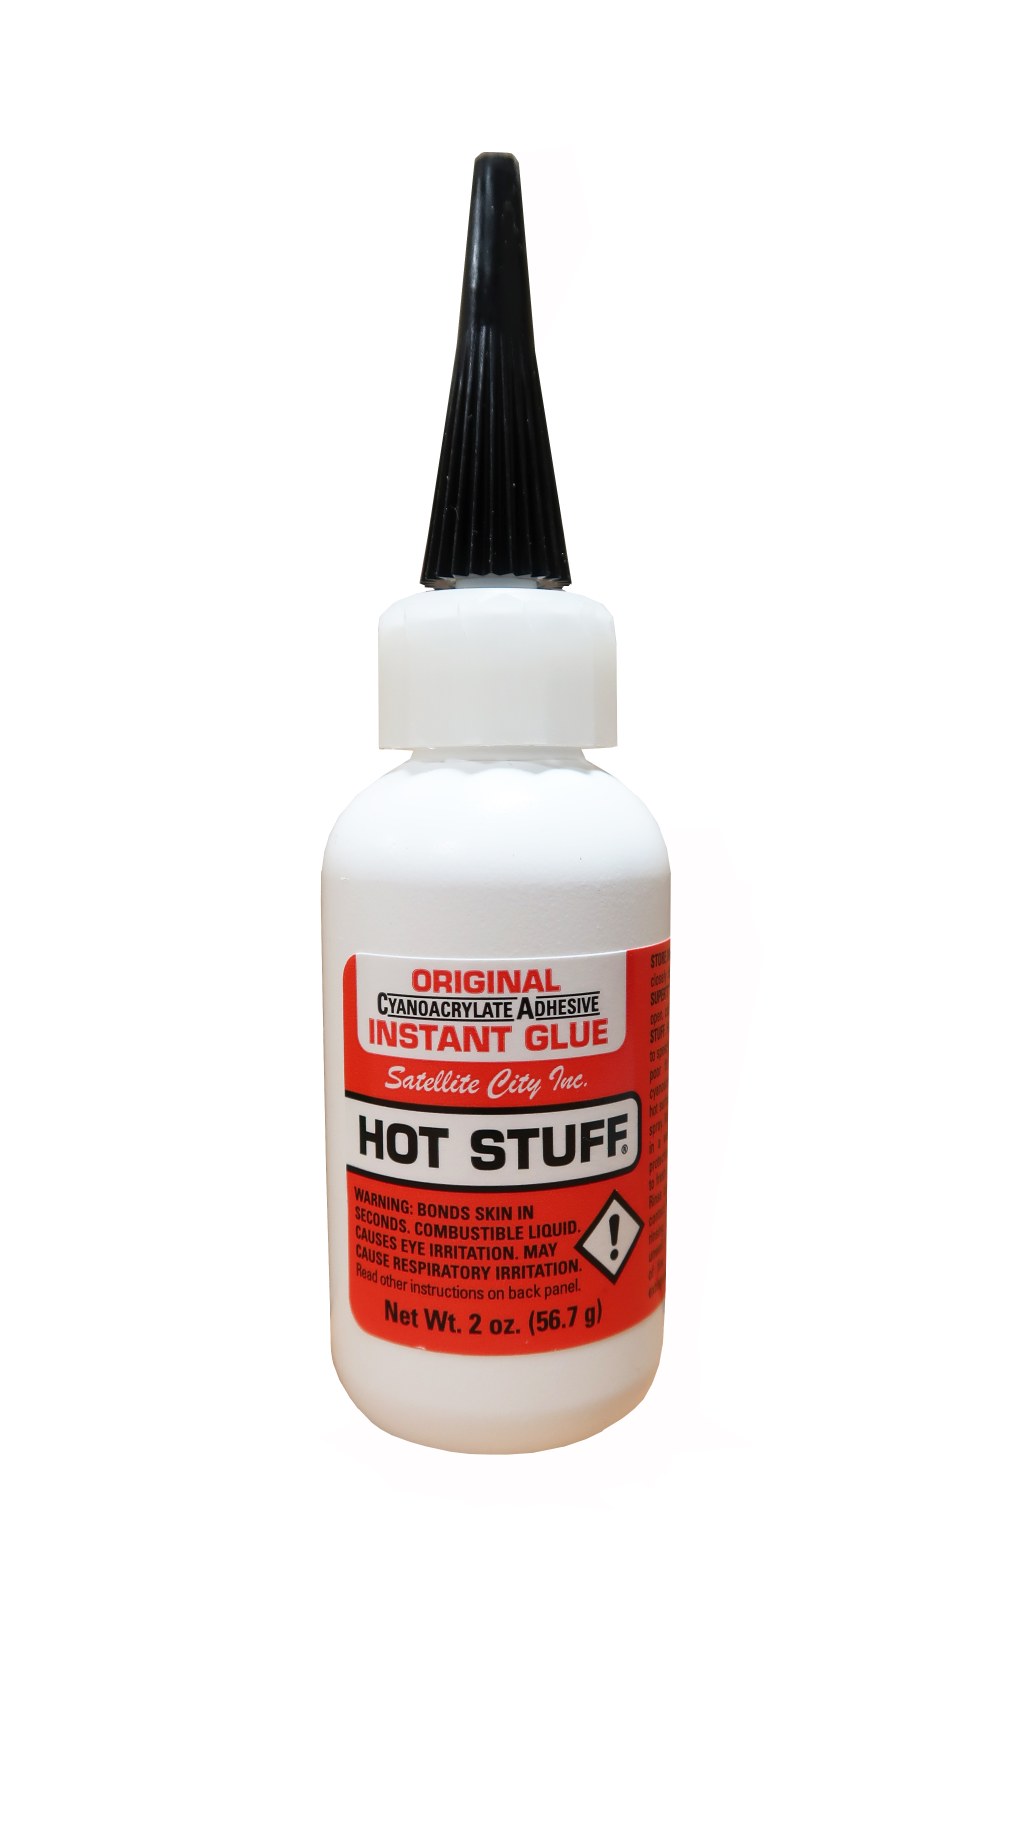 Picture of: HS- Hot Stuff oz thin CA glue from Satellite City Instant Glues